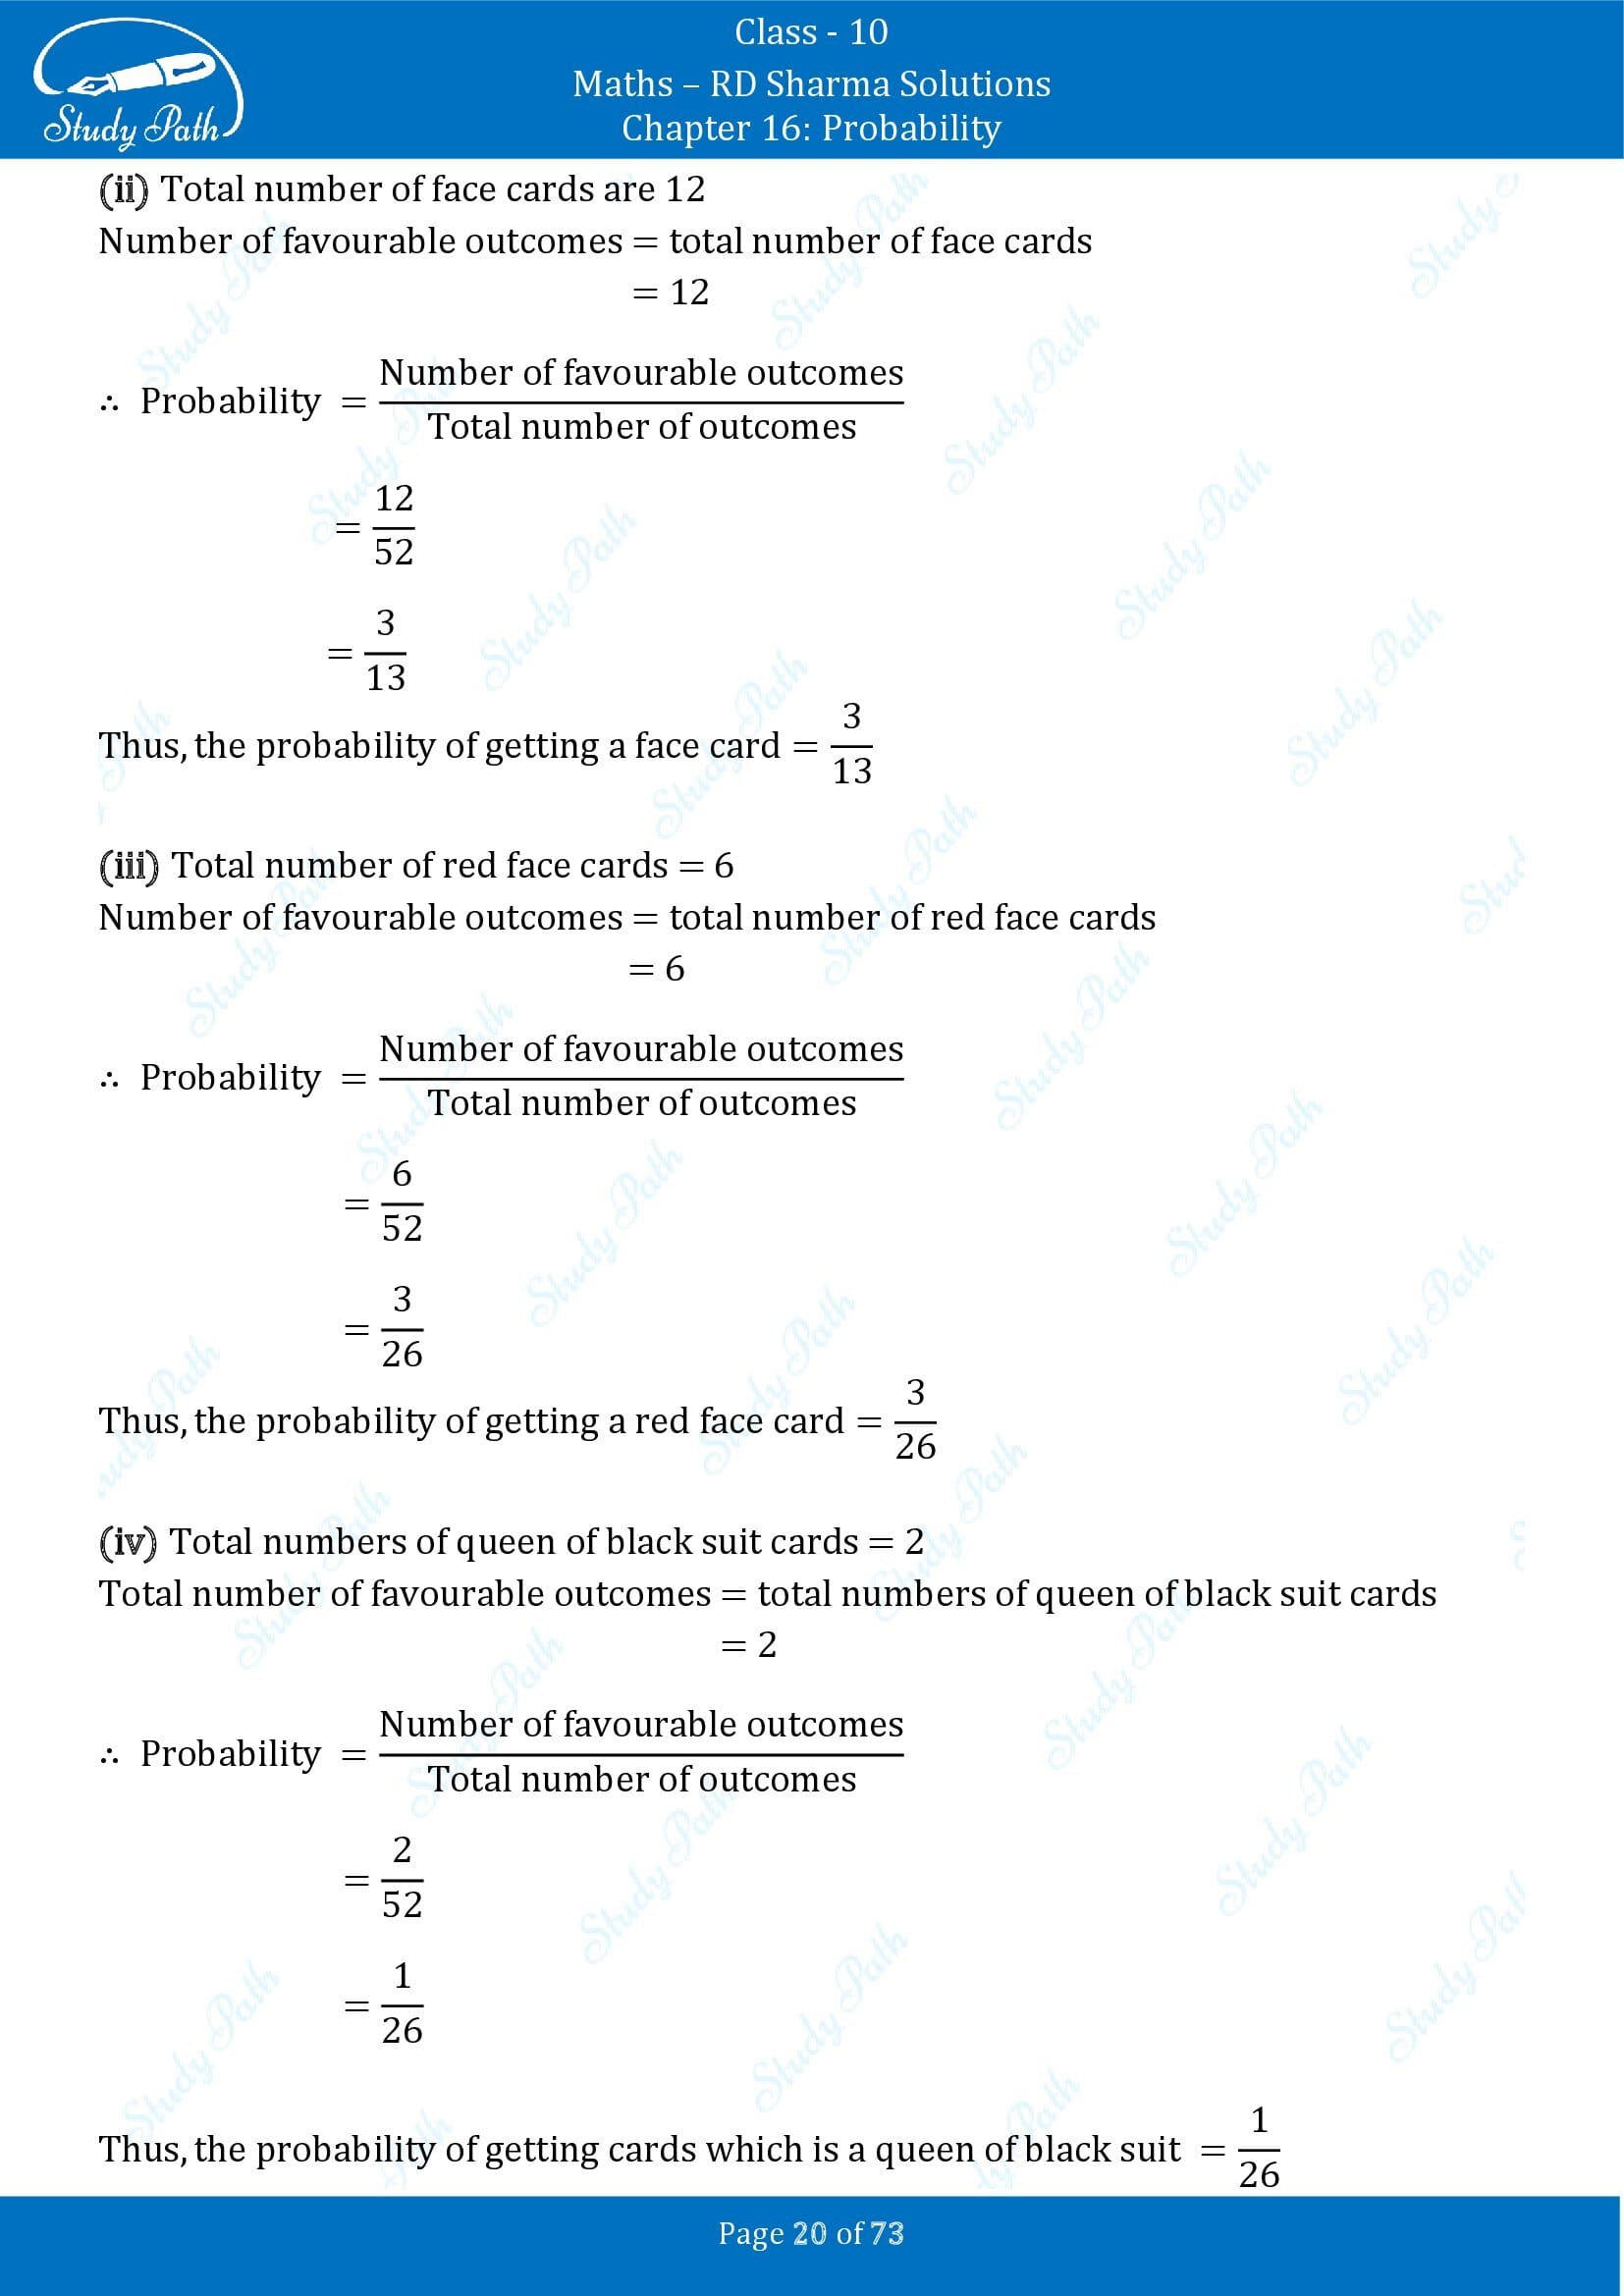 RD Sharma Solutions Class 10 Chapter 16 Probability Exercise 16.1 00020